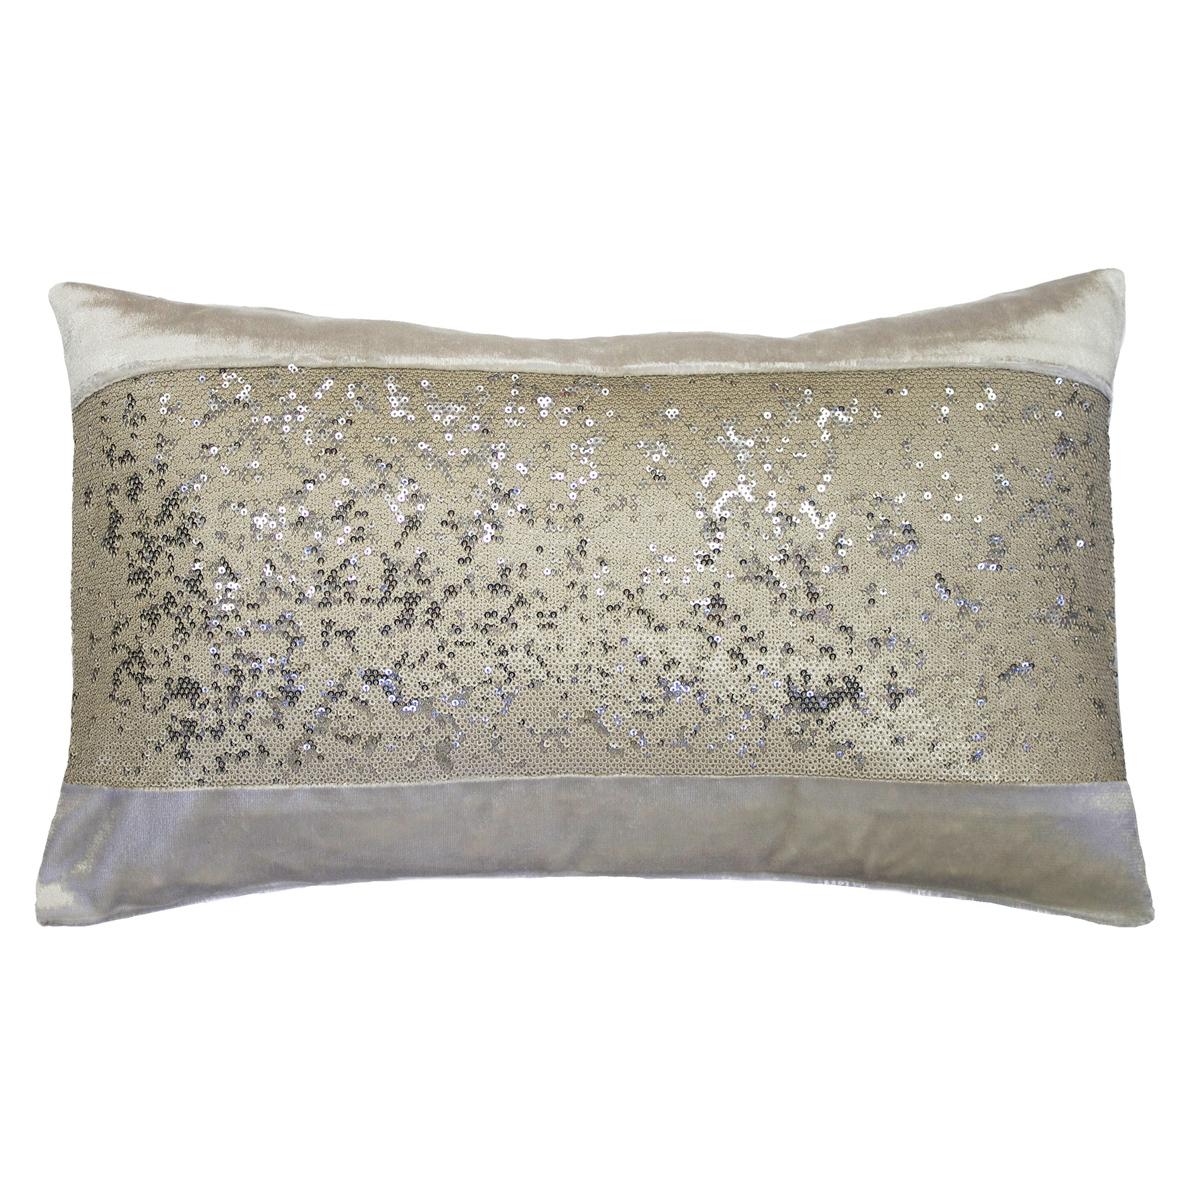 Oyster Kylie Minogue Duo Cushion | Free UK Delivery | Terrys Fabrics